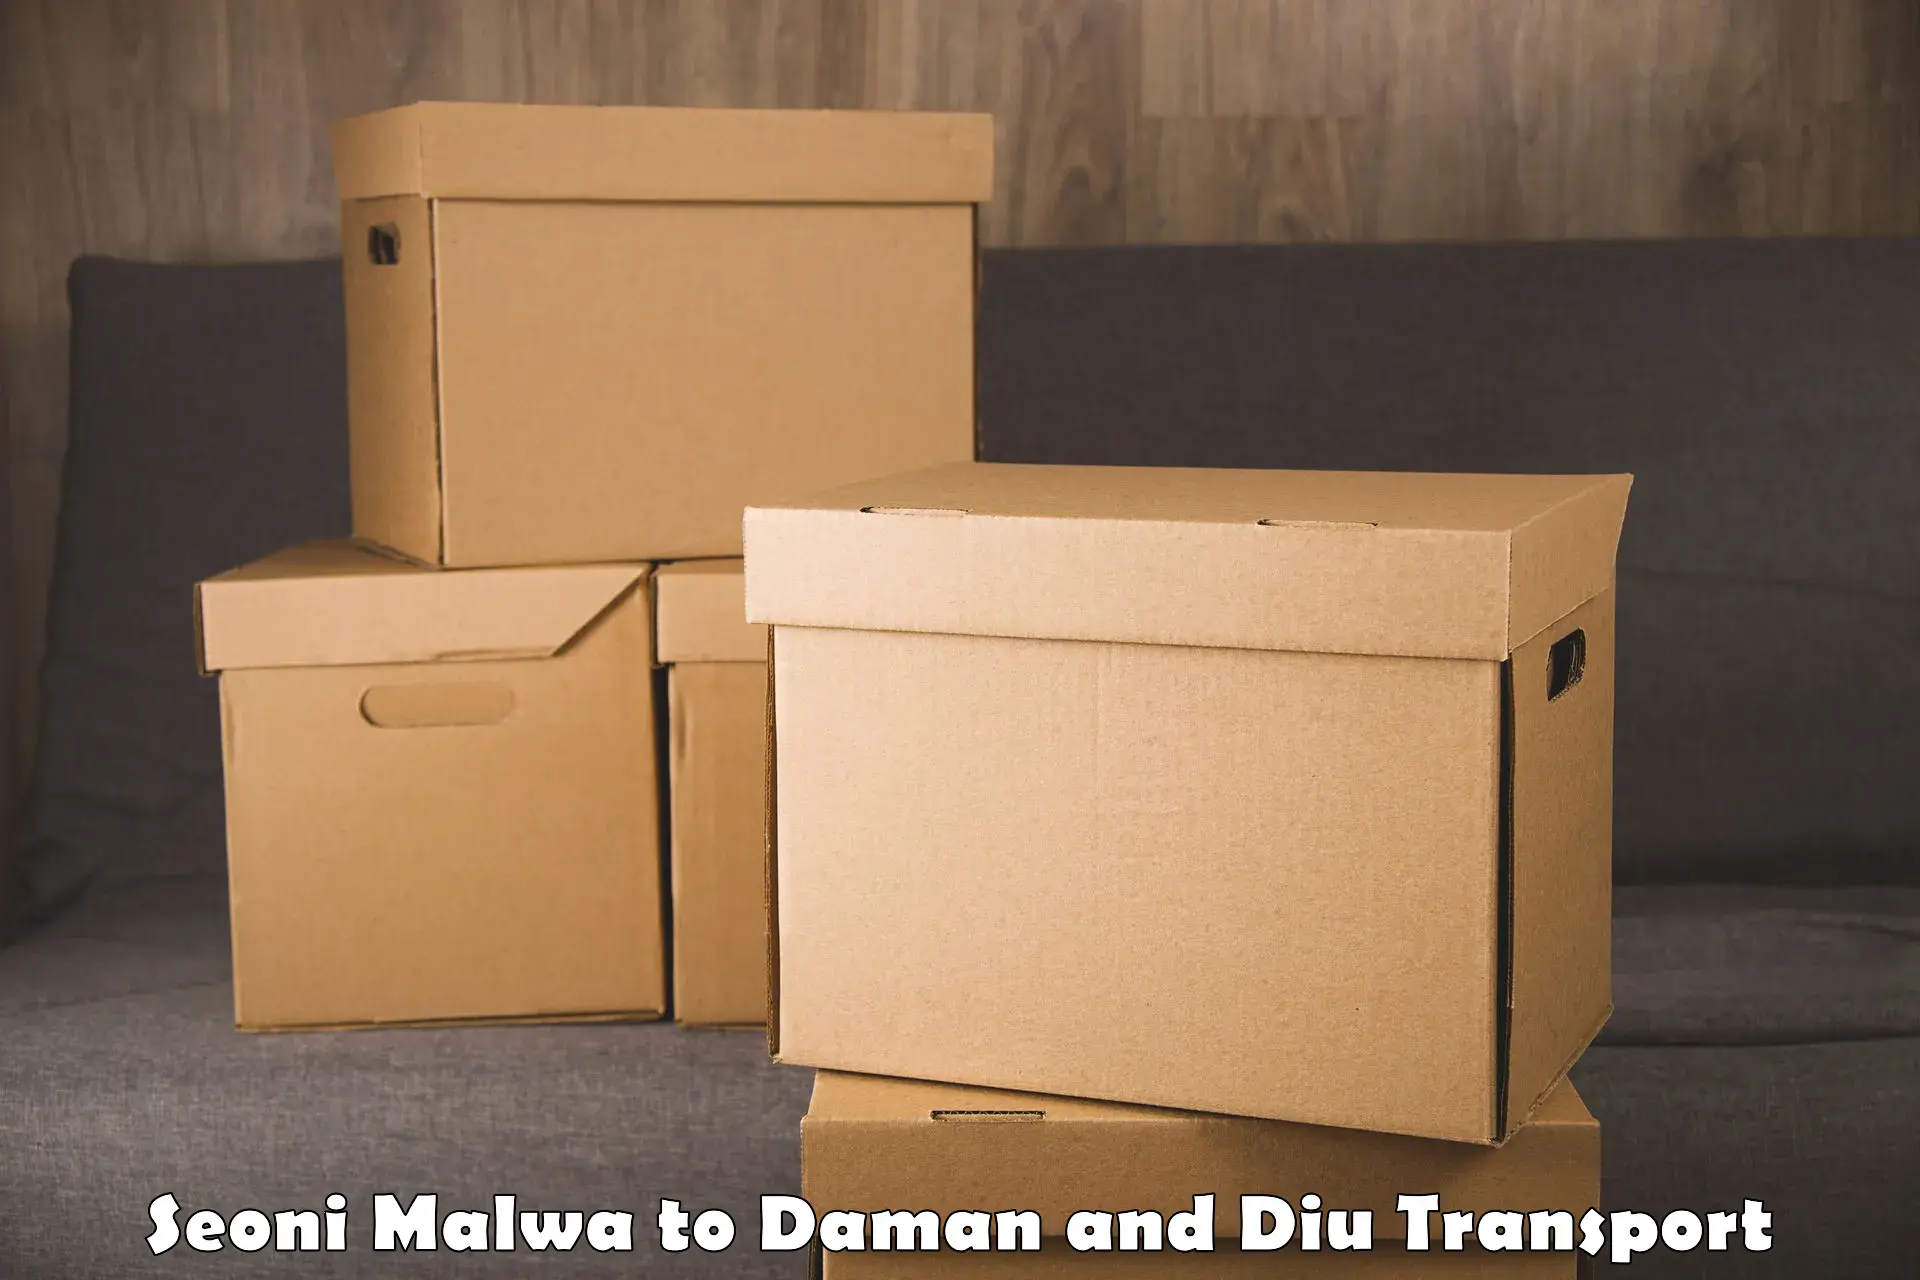 Air freight transport services Seoni Malwa to Daman and Diu